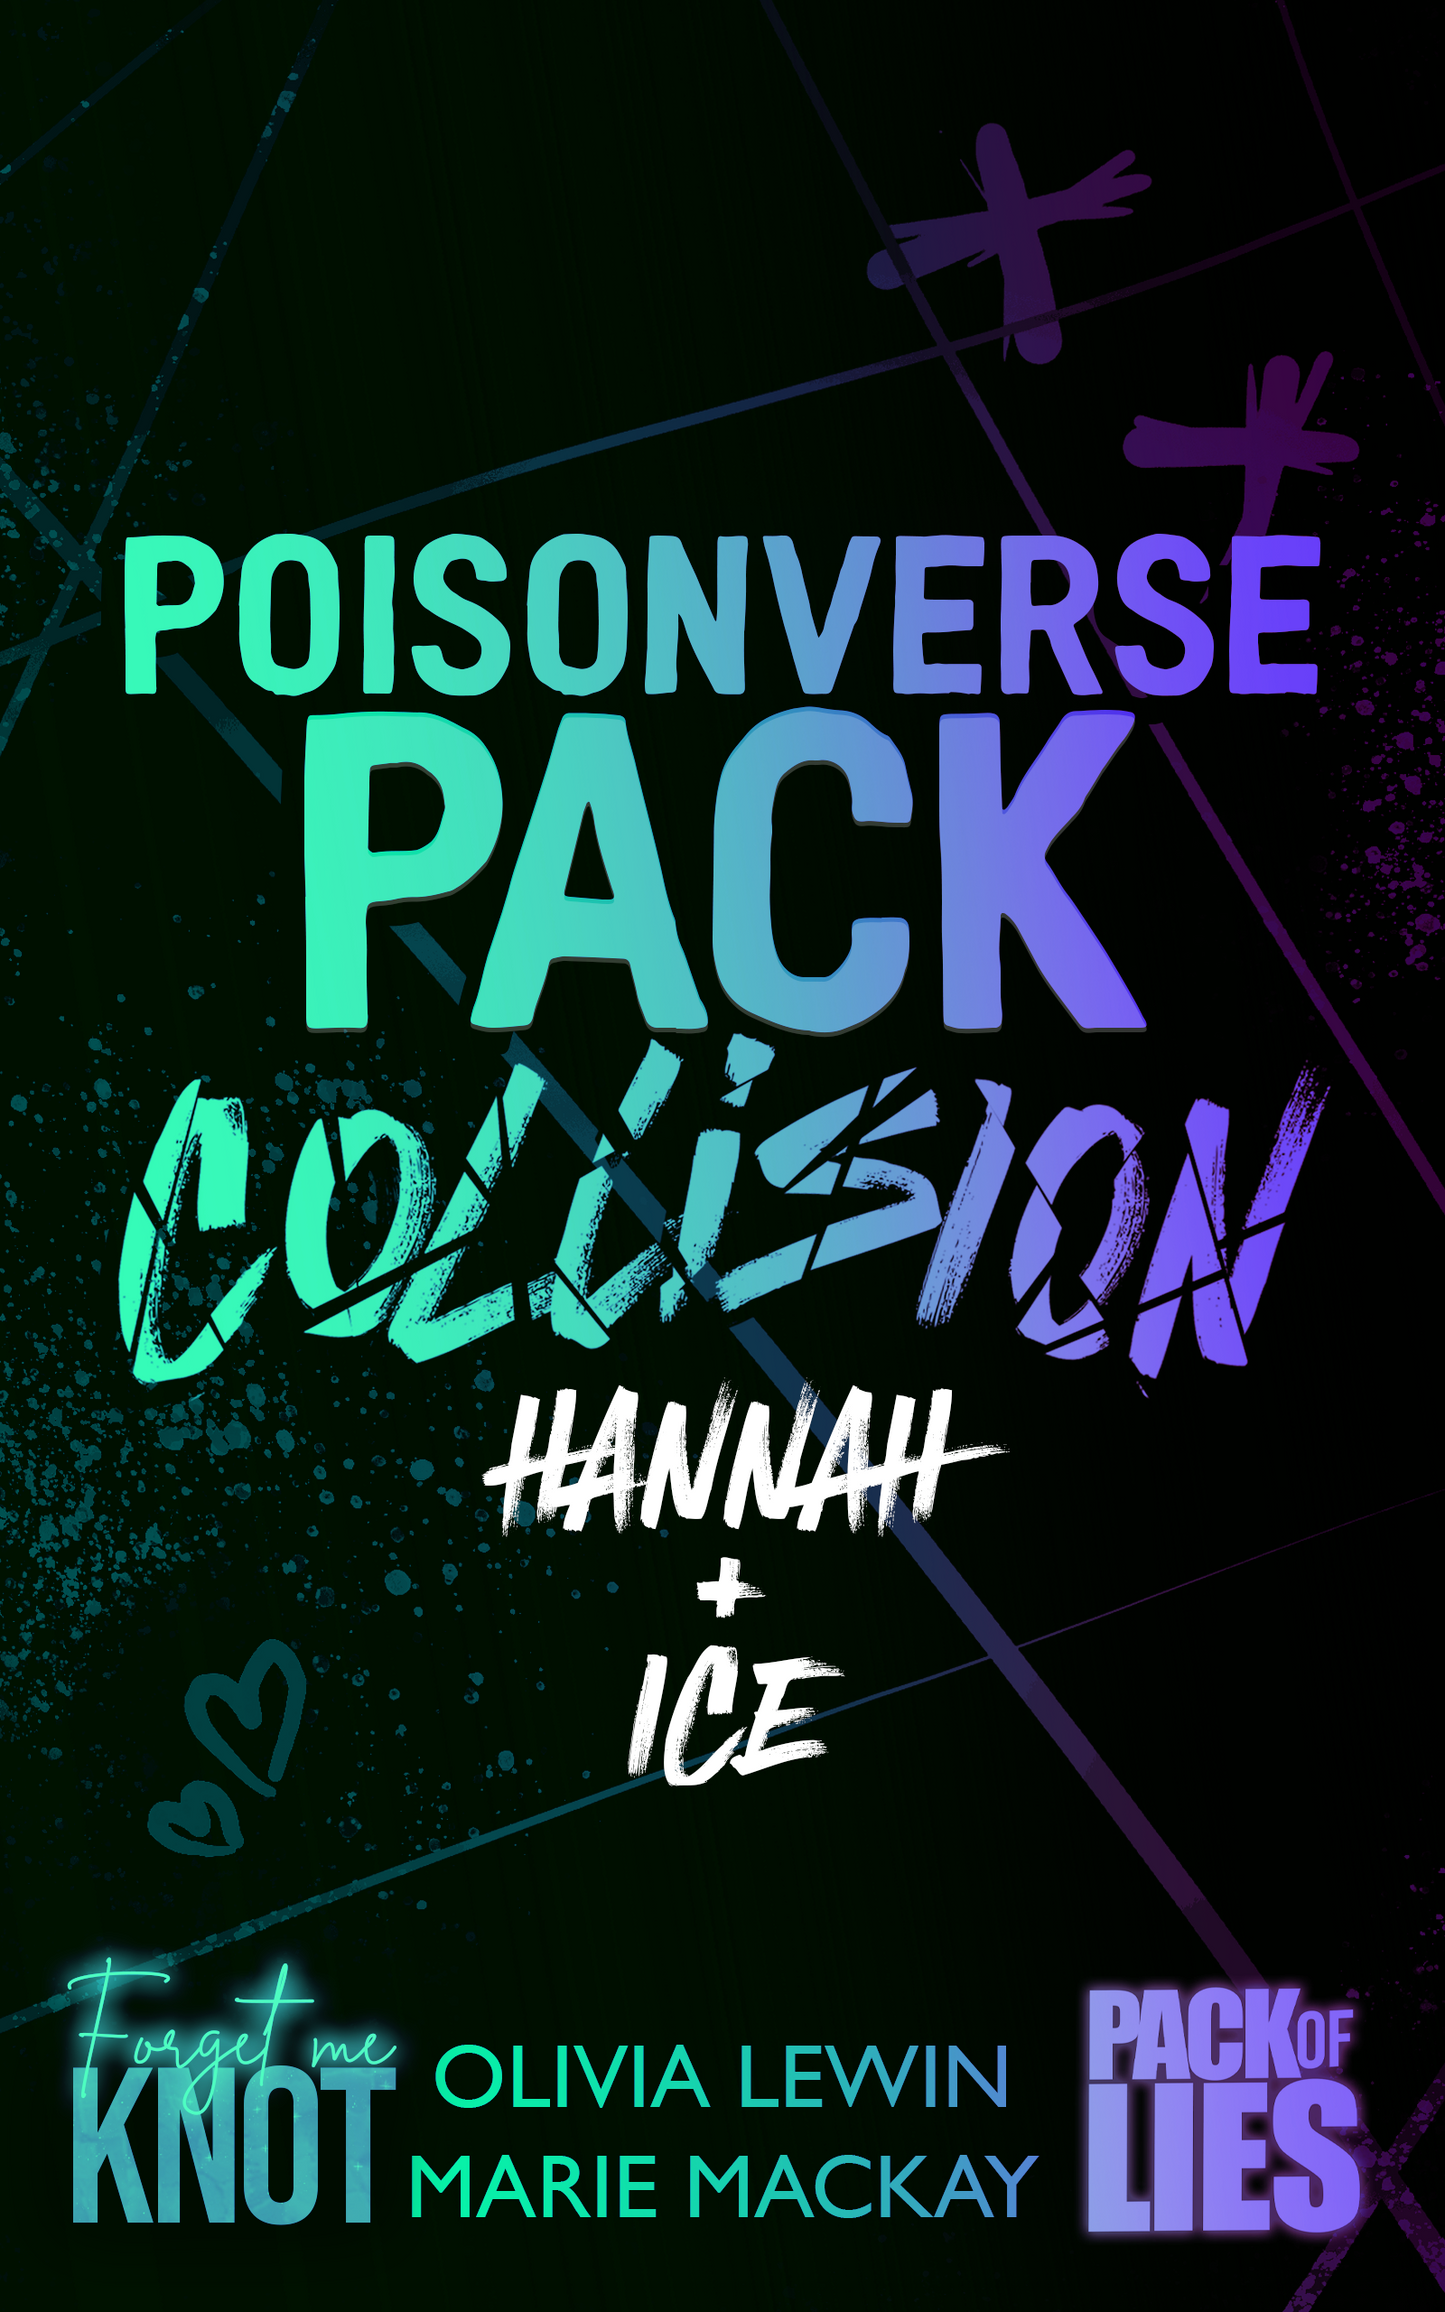 PoisonVerse Pack Collision: Hannah and Ice